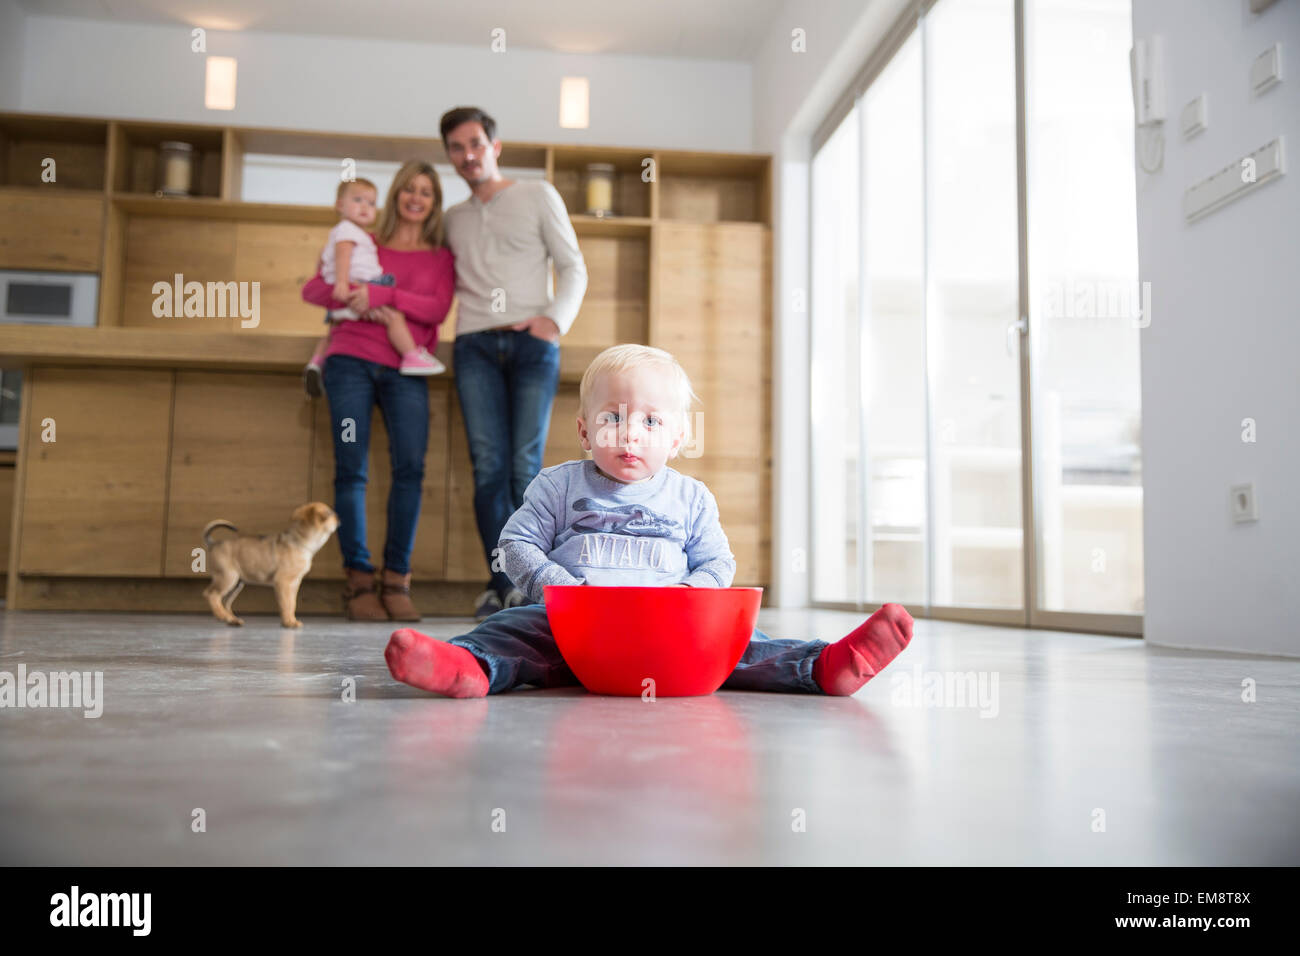 Family watching male toddler with bowl on dining room floor Stock Photo